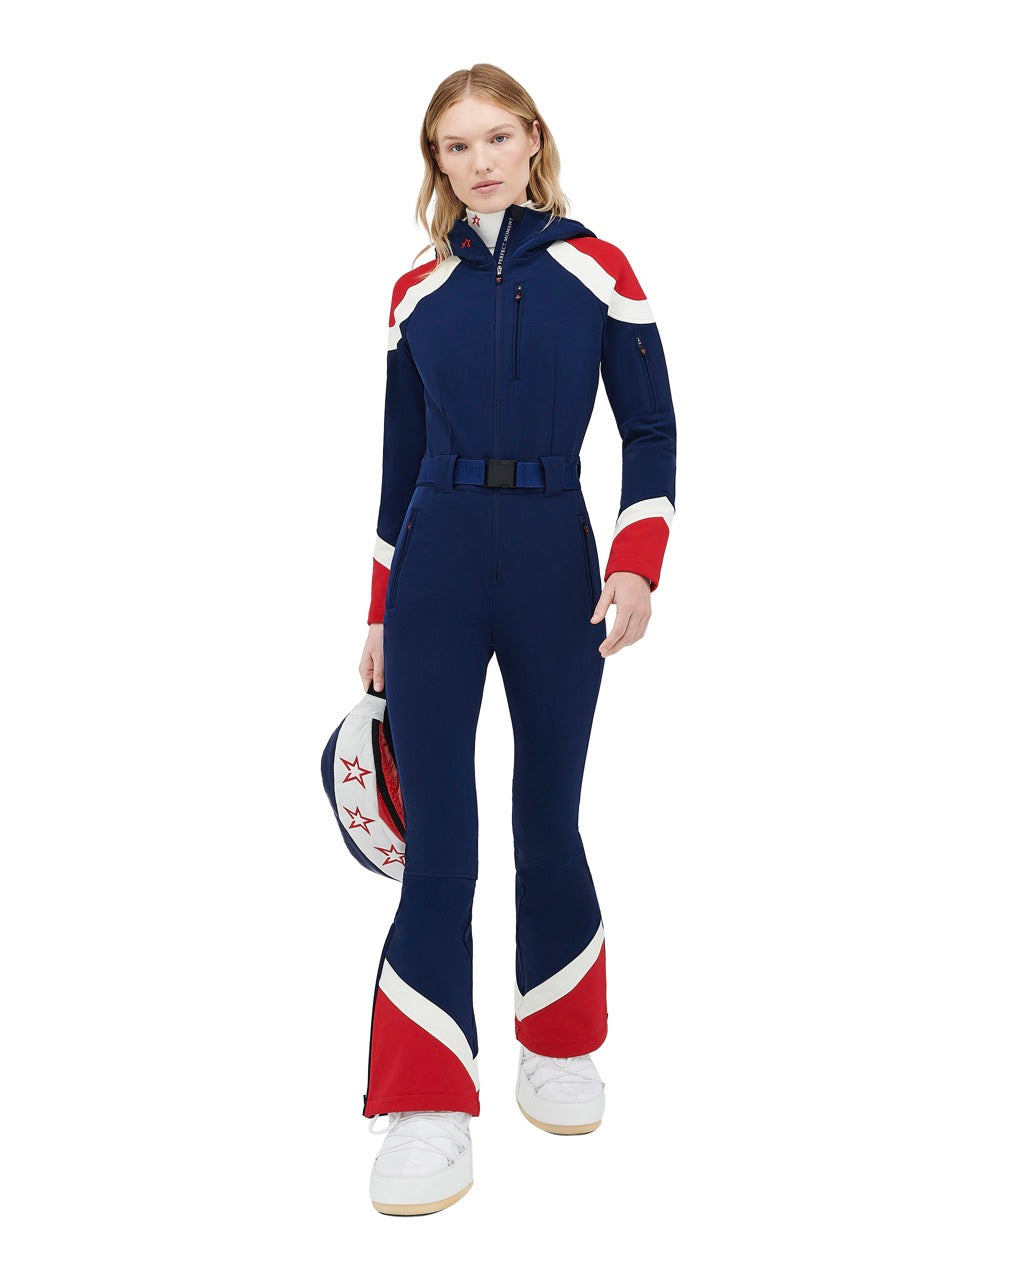 Perfect Moment Women's Allos Ski Suit - Navy & Red